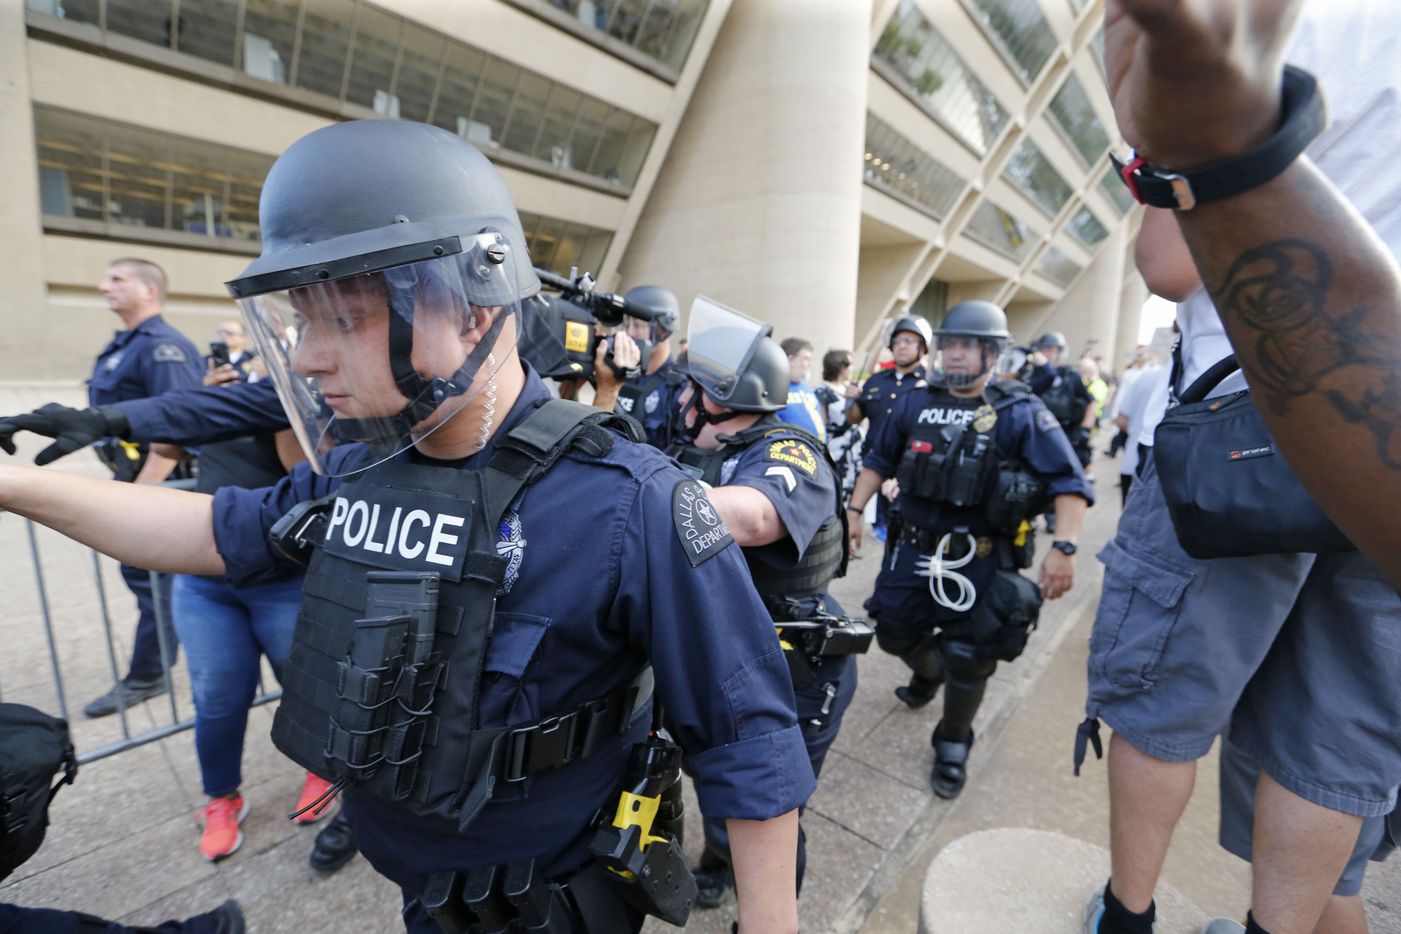 Dallas Police move into place during the March Against White Supremacy at Dallas City Hall.